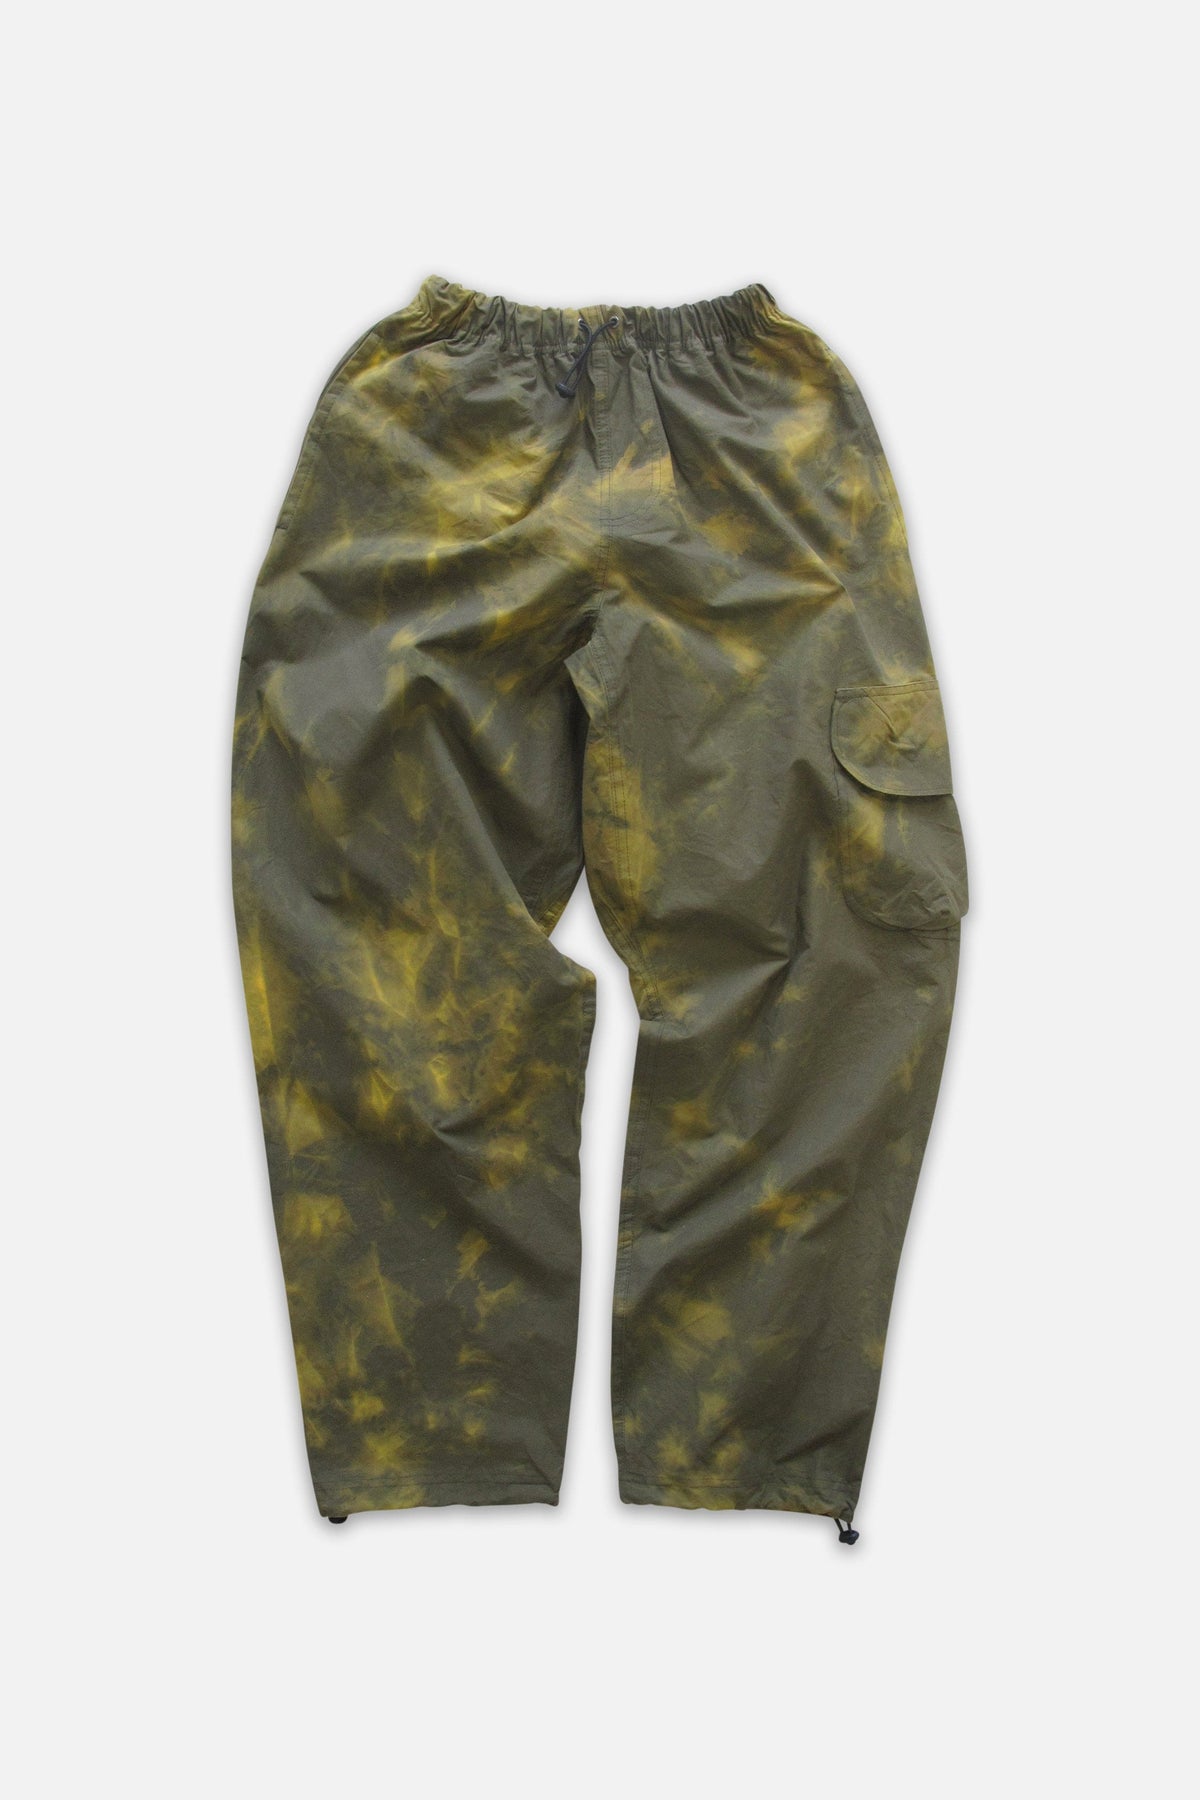 Belgian Army Trousers  Jigsaw Camo Combats  DISTRESSED RANGE  Forces  Uniform and Kit